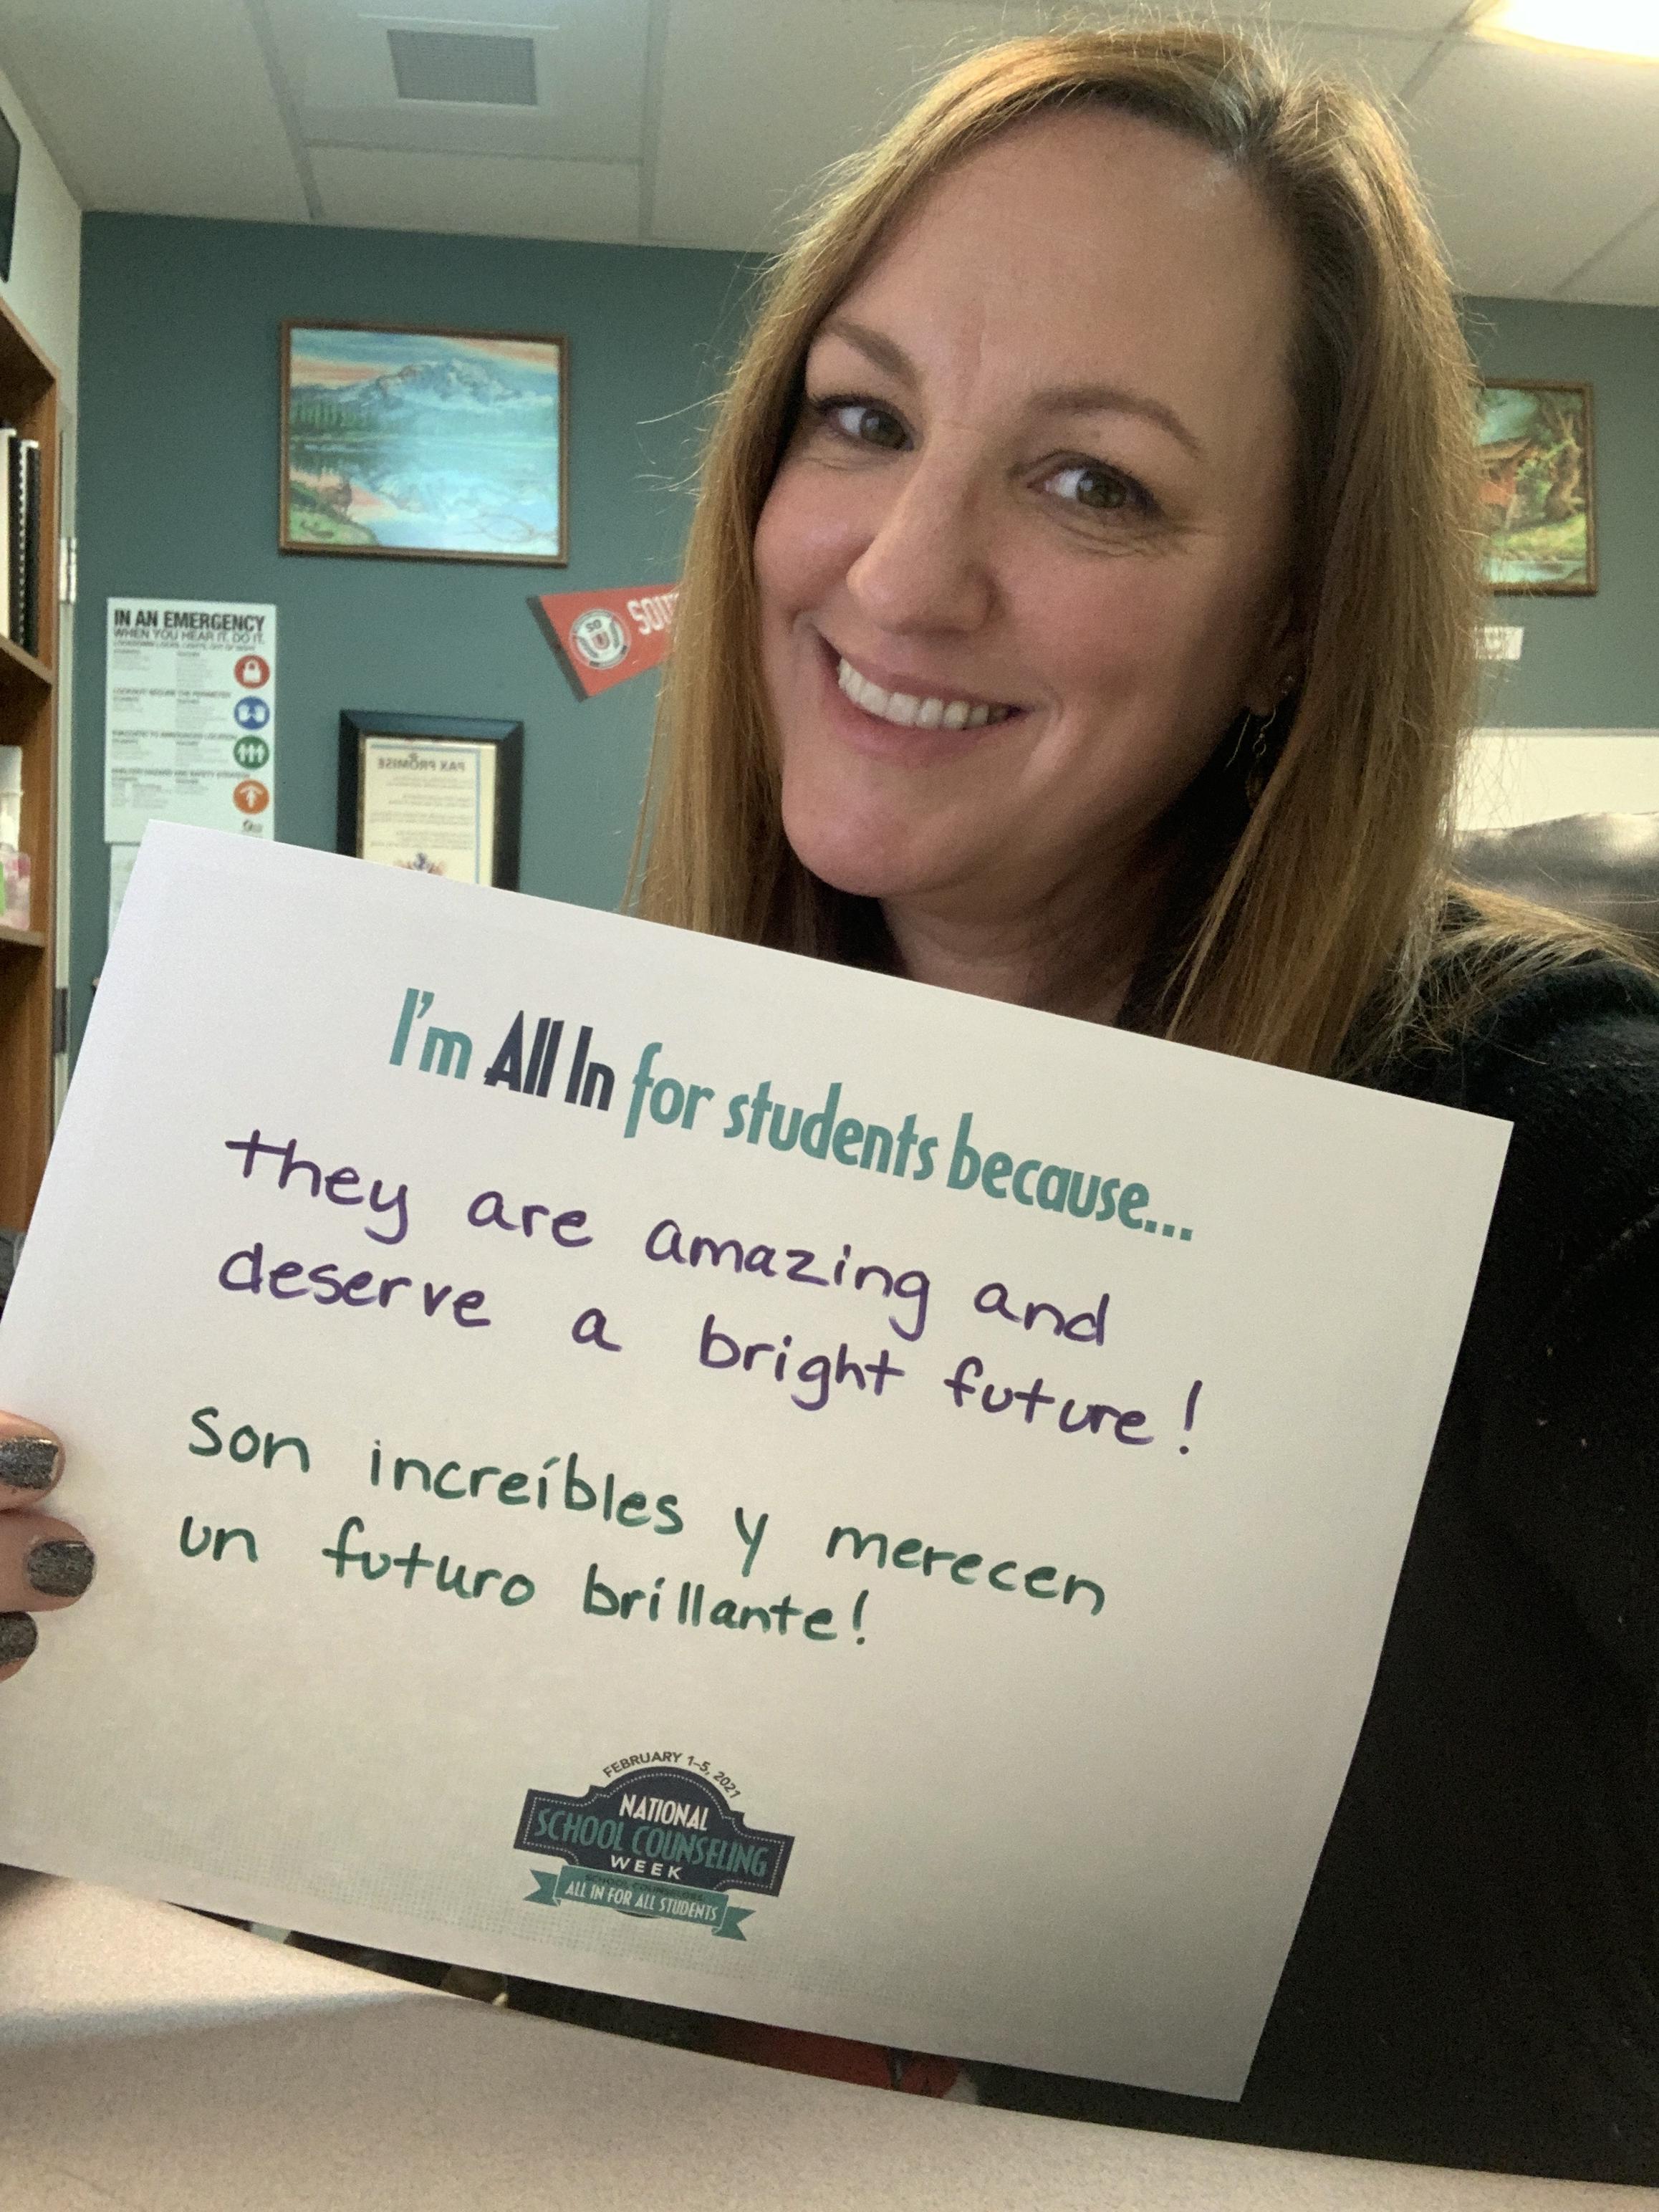 Jennifer Yankovich with a sign "I'm all in for students because they are amazing and deserve a bright future!"